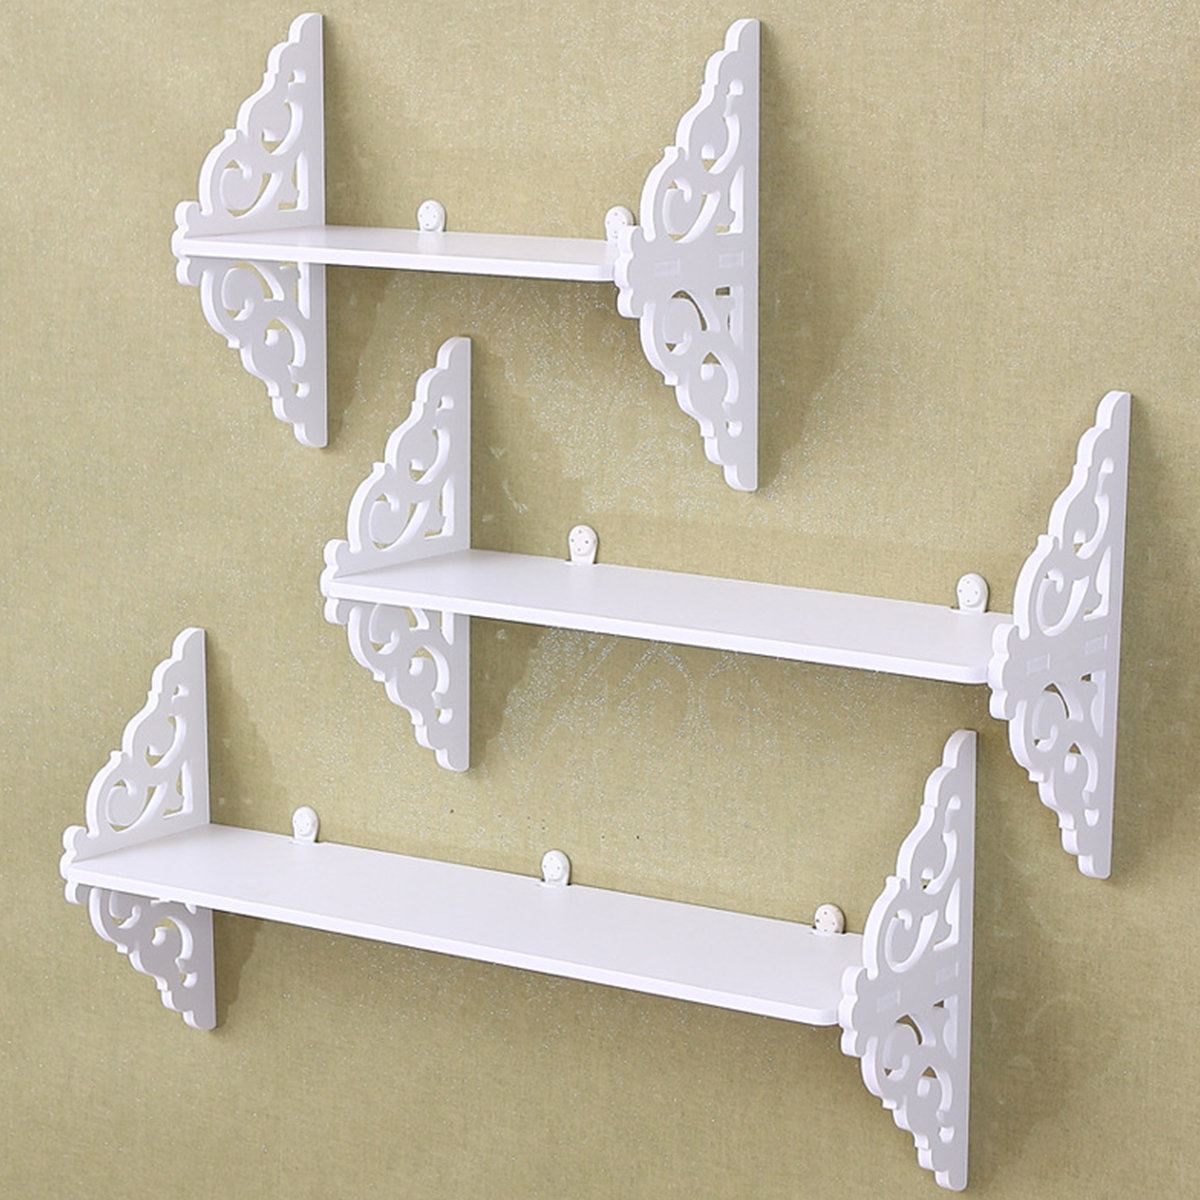 3Pcs-Punch-free-Wood-Carved-Wall-Shelves-Hanging-Rack-for-Home-Living-Room-Bedroom-Study-Decorations-1731665-7